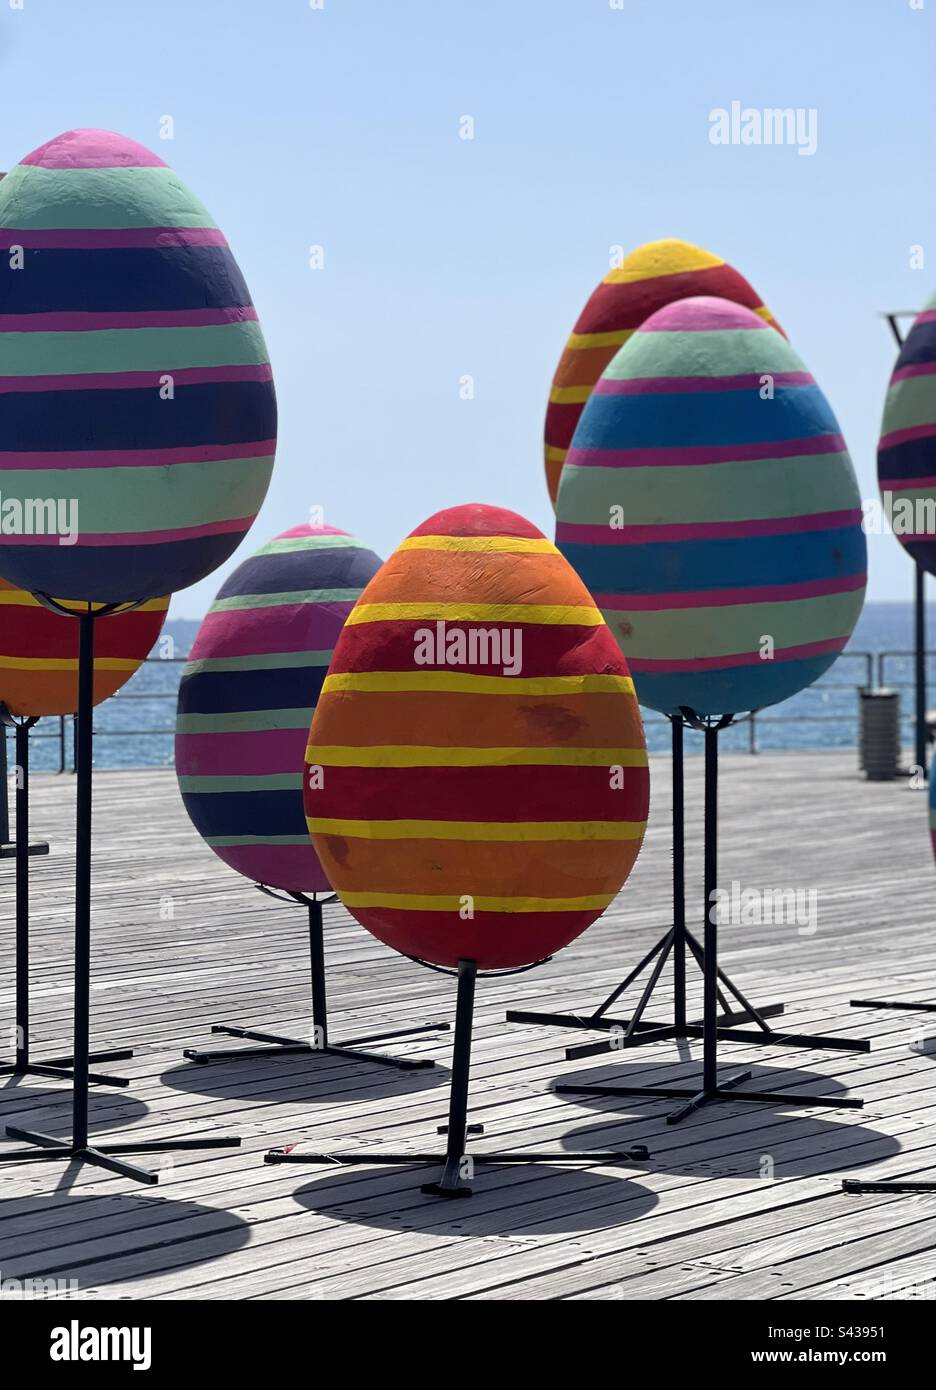 Freestanding brightly coloured Easter eggs in Limassol Cyprus outside Stock Photo